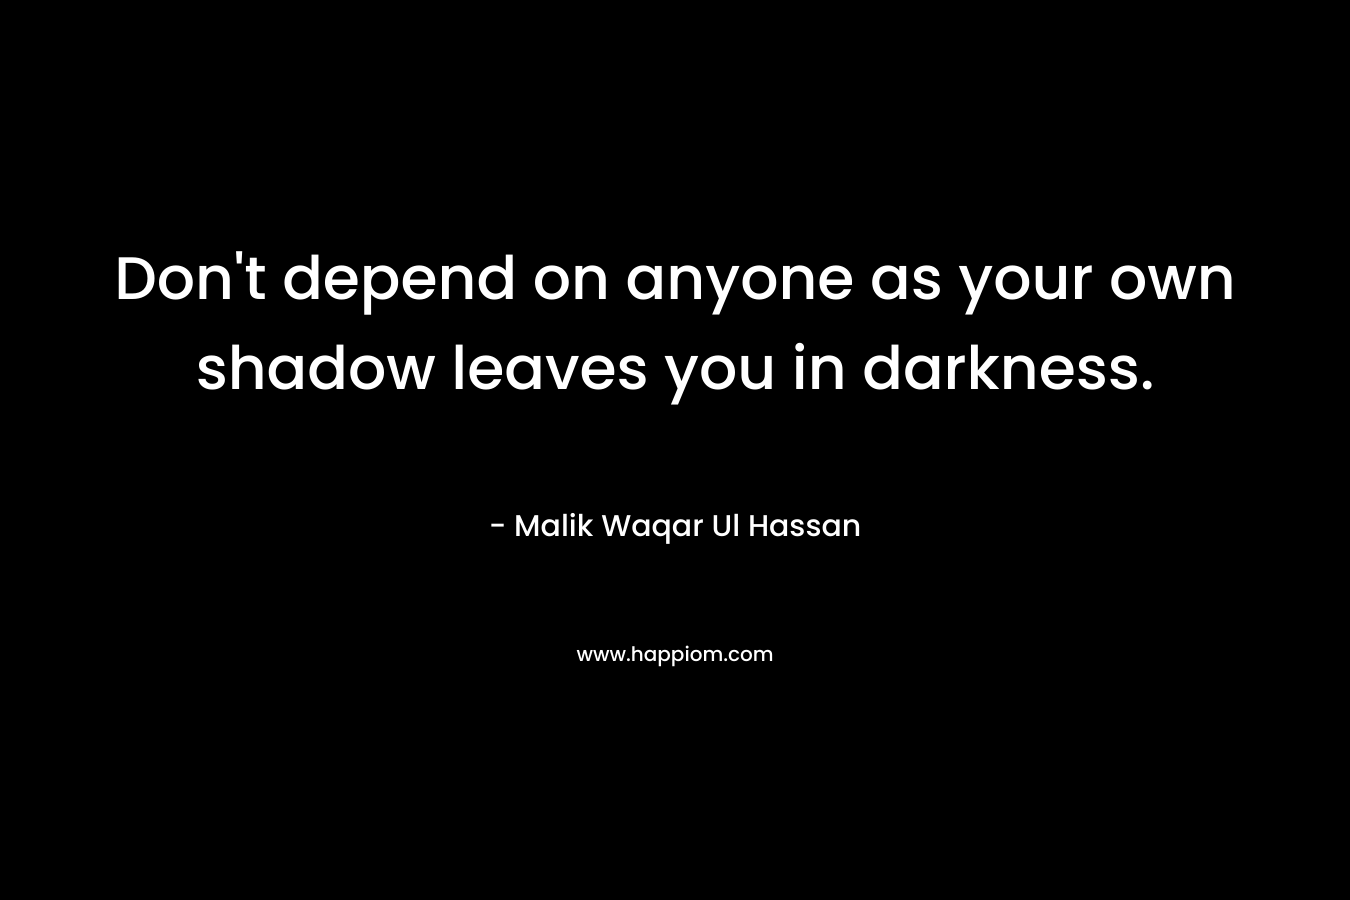 Don't depend on anyone as your own shadow leaves you in darkness.